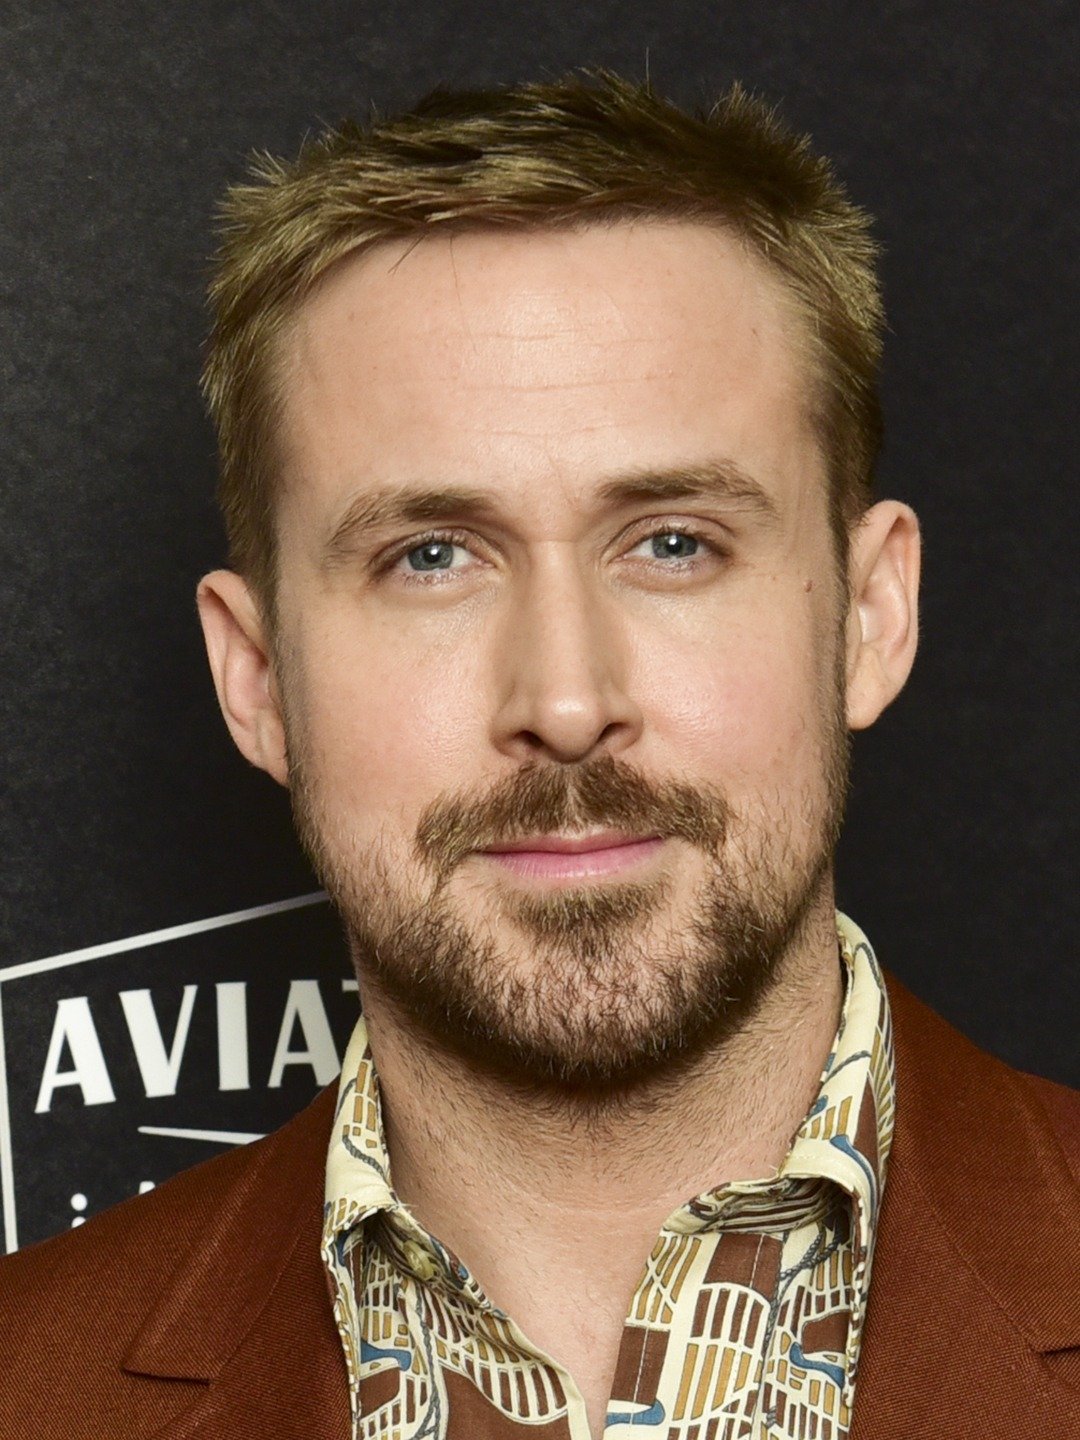 Rotten Tomatoes - Ryan Gosling and Chris Evans will star